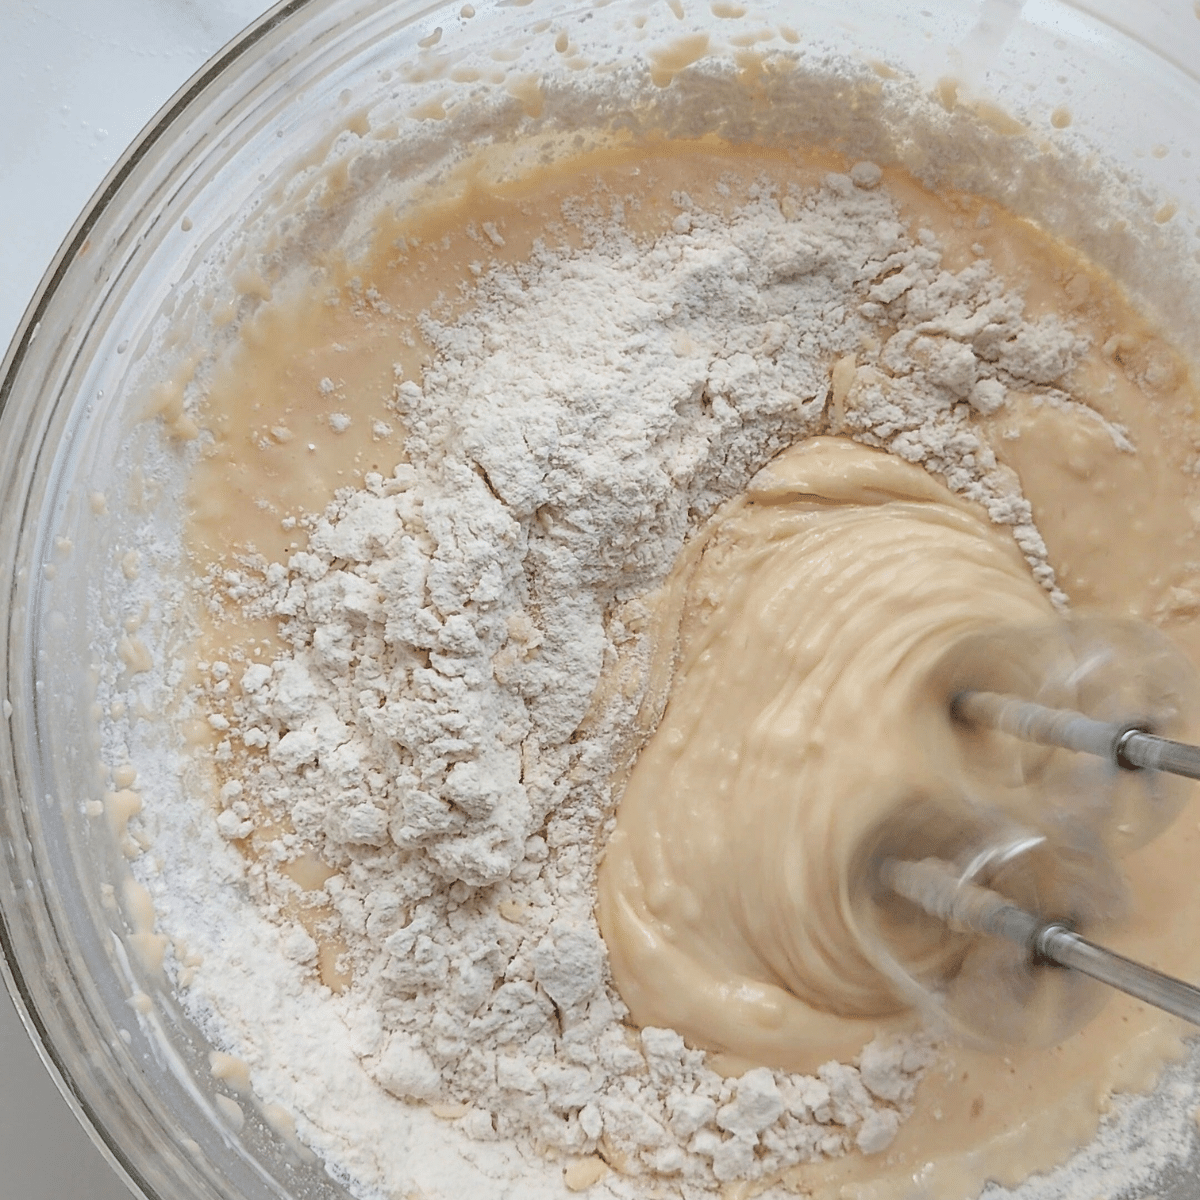 Mix in the flour mixture